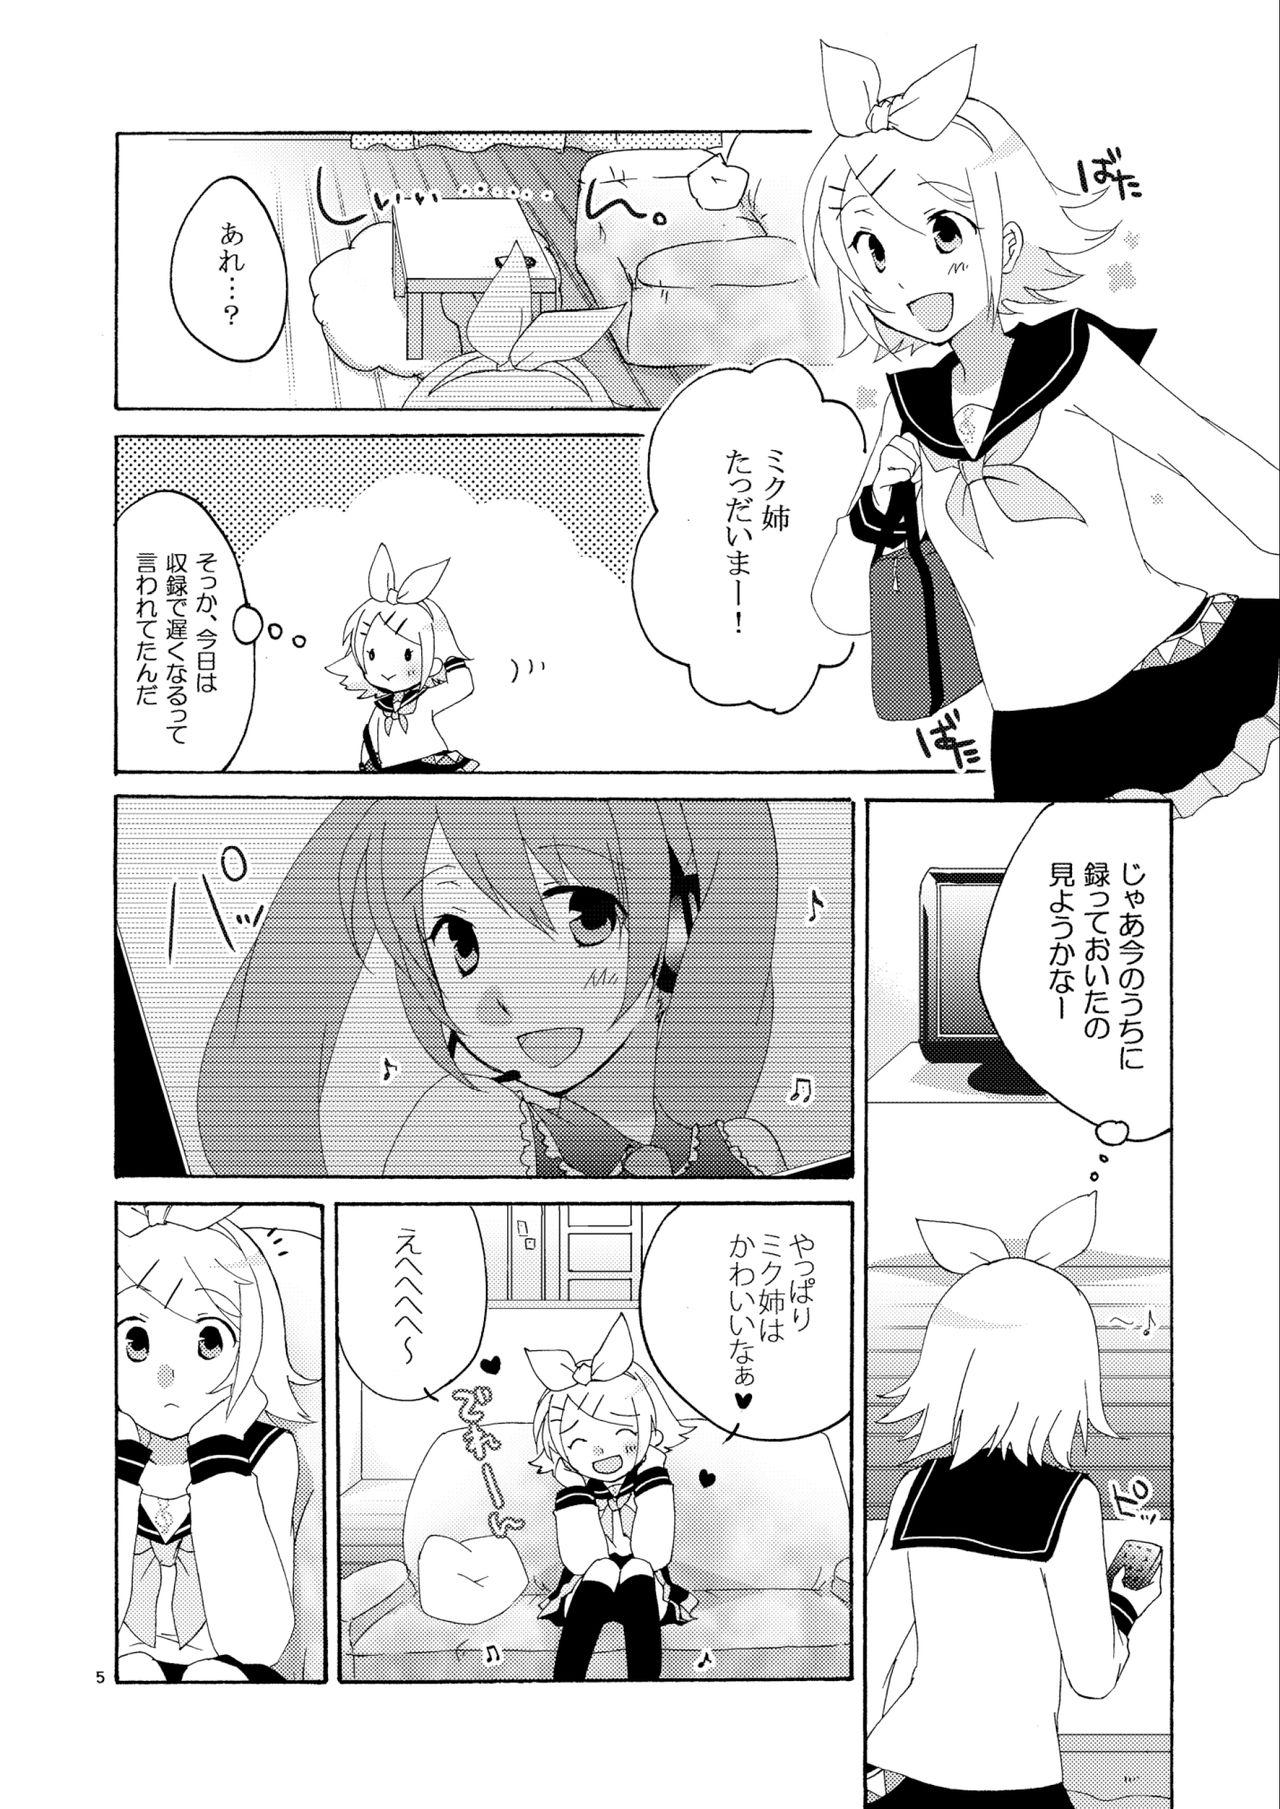 Peeing Hanny Box - Vocaloid Caliente - Page 4